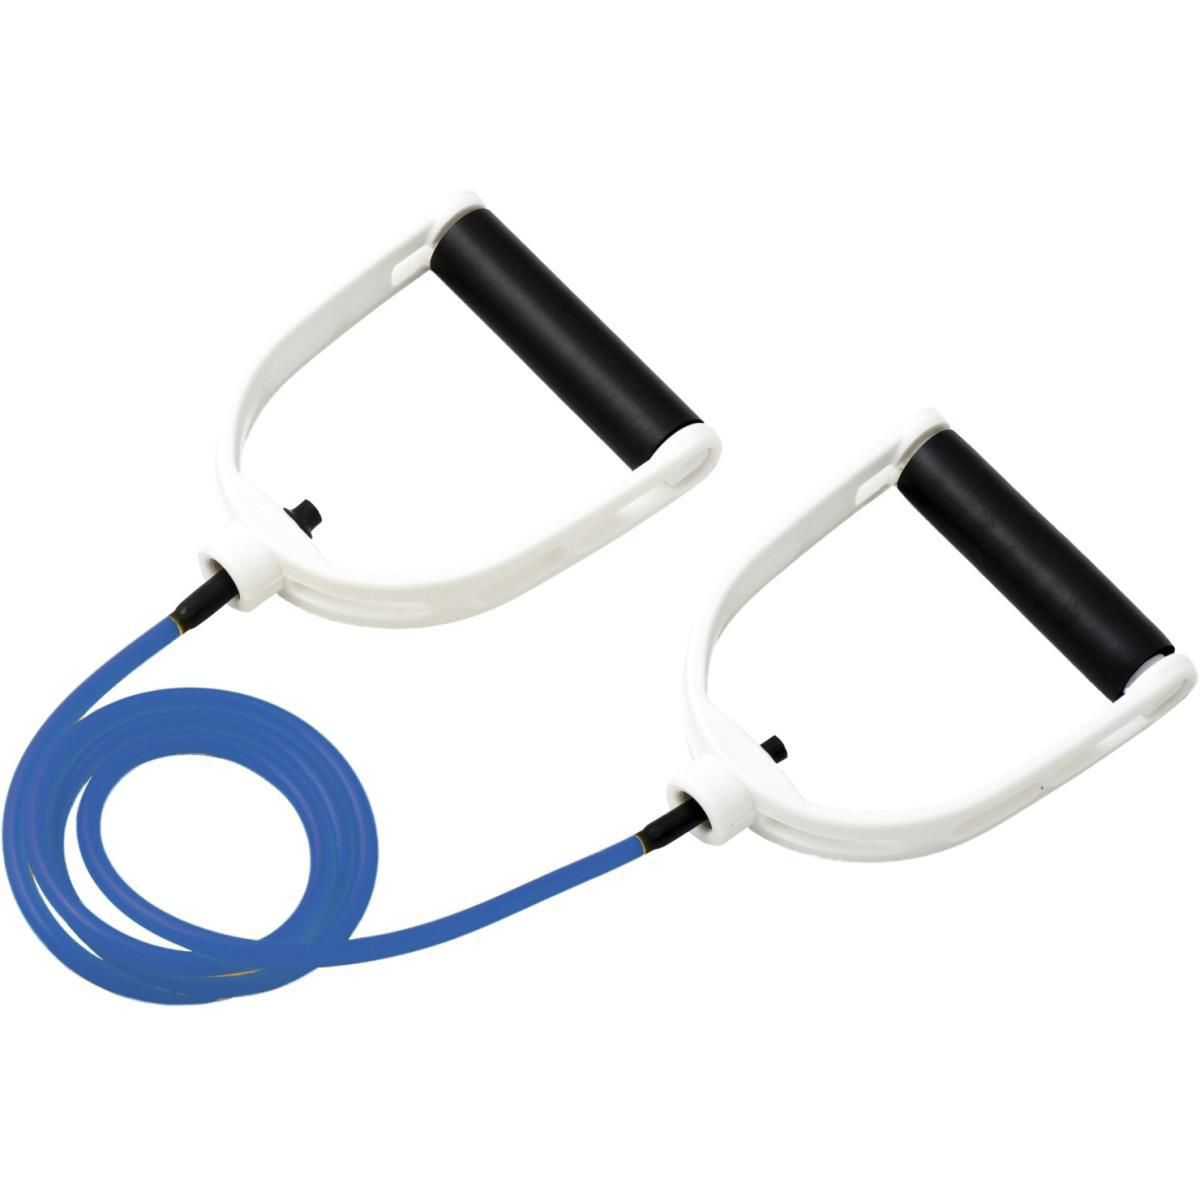 Image for HappyHealth Heavy Resistance Tubing, Royal Blue at Kohl's.